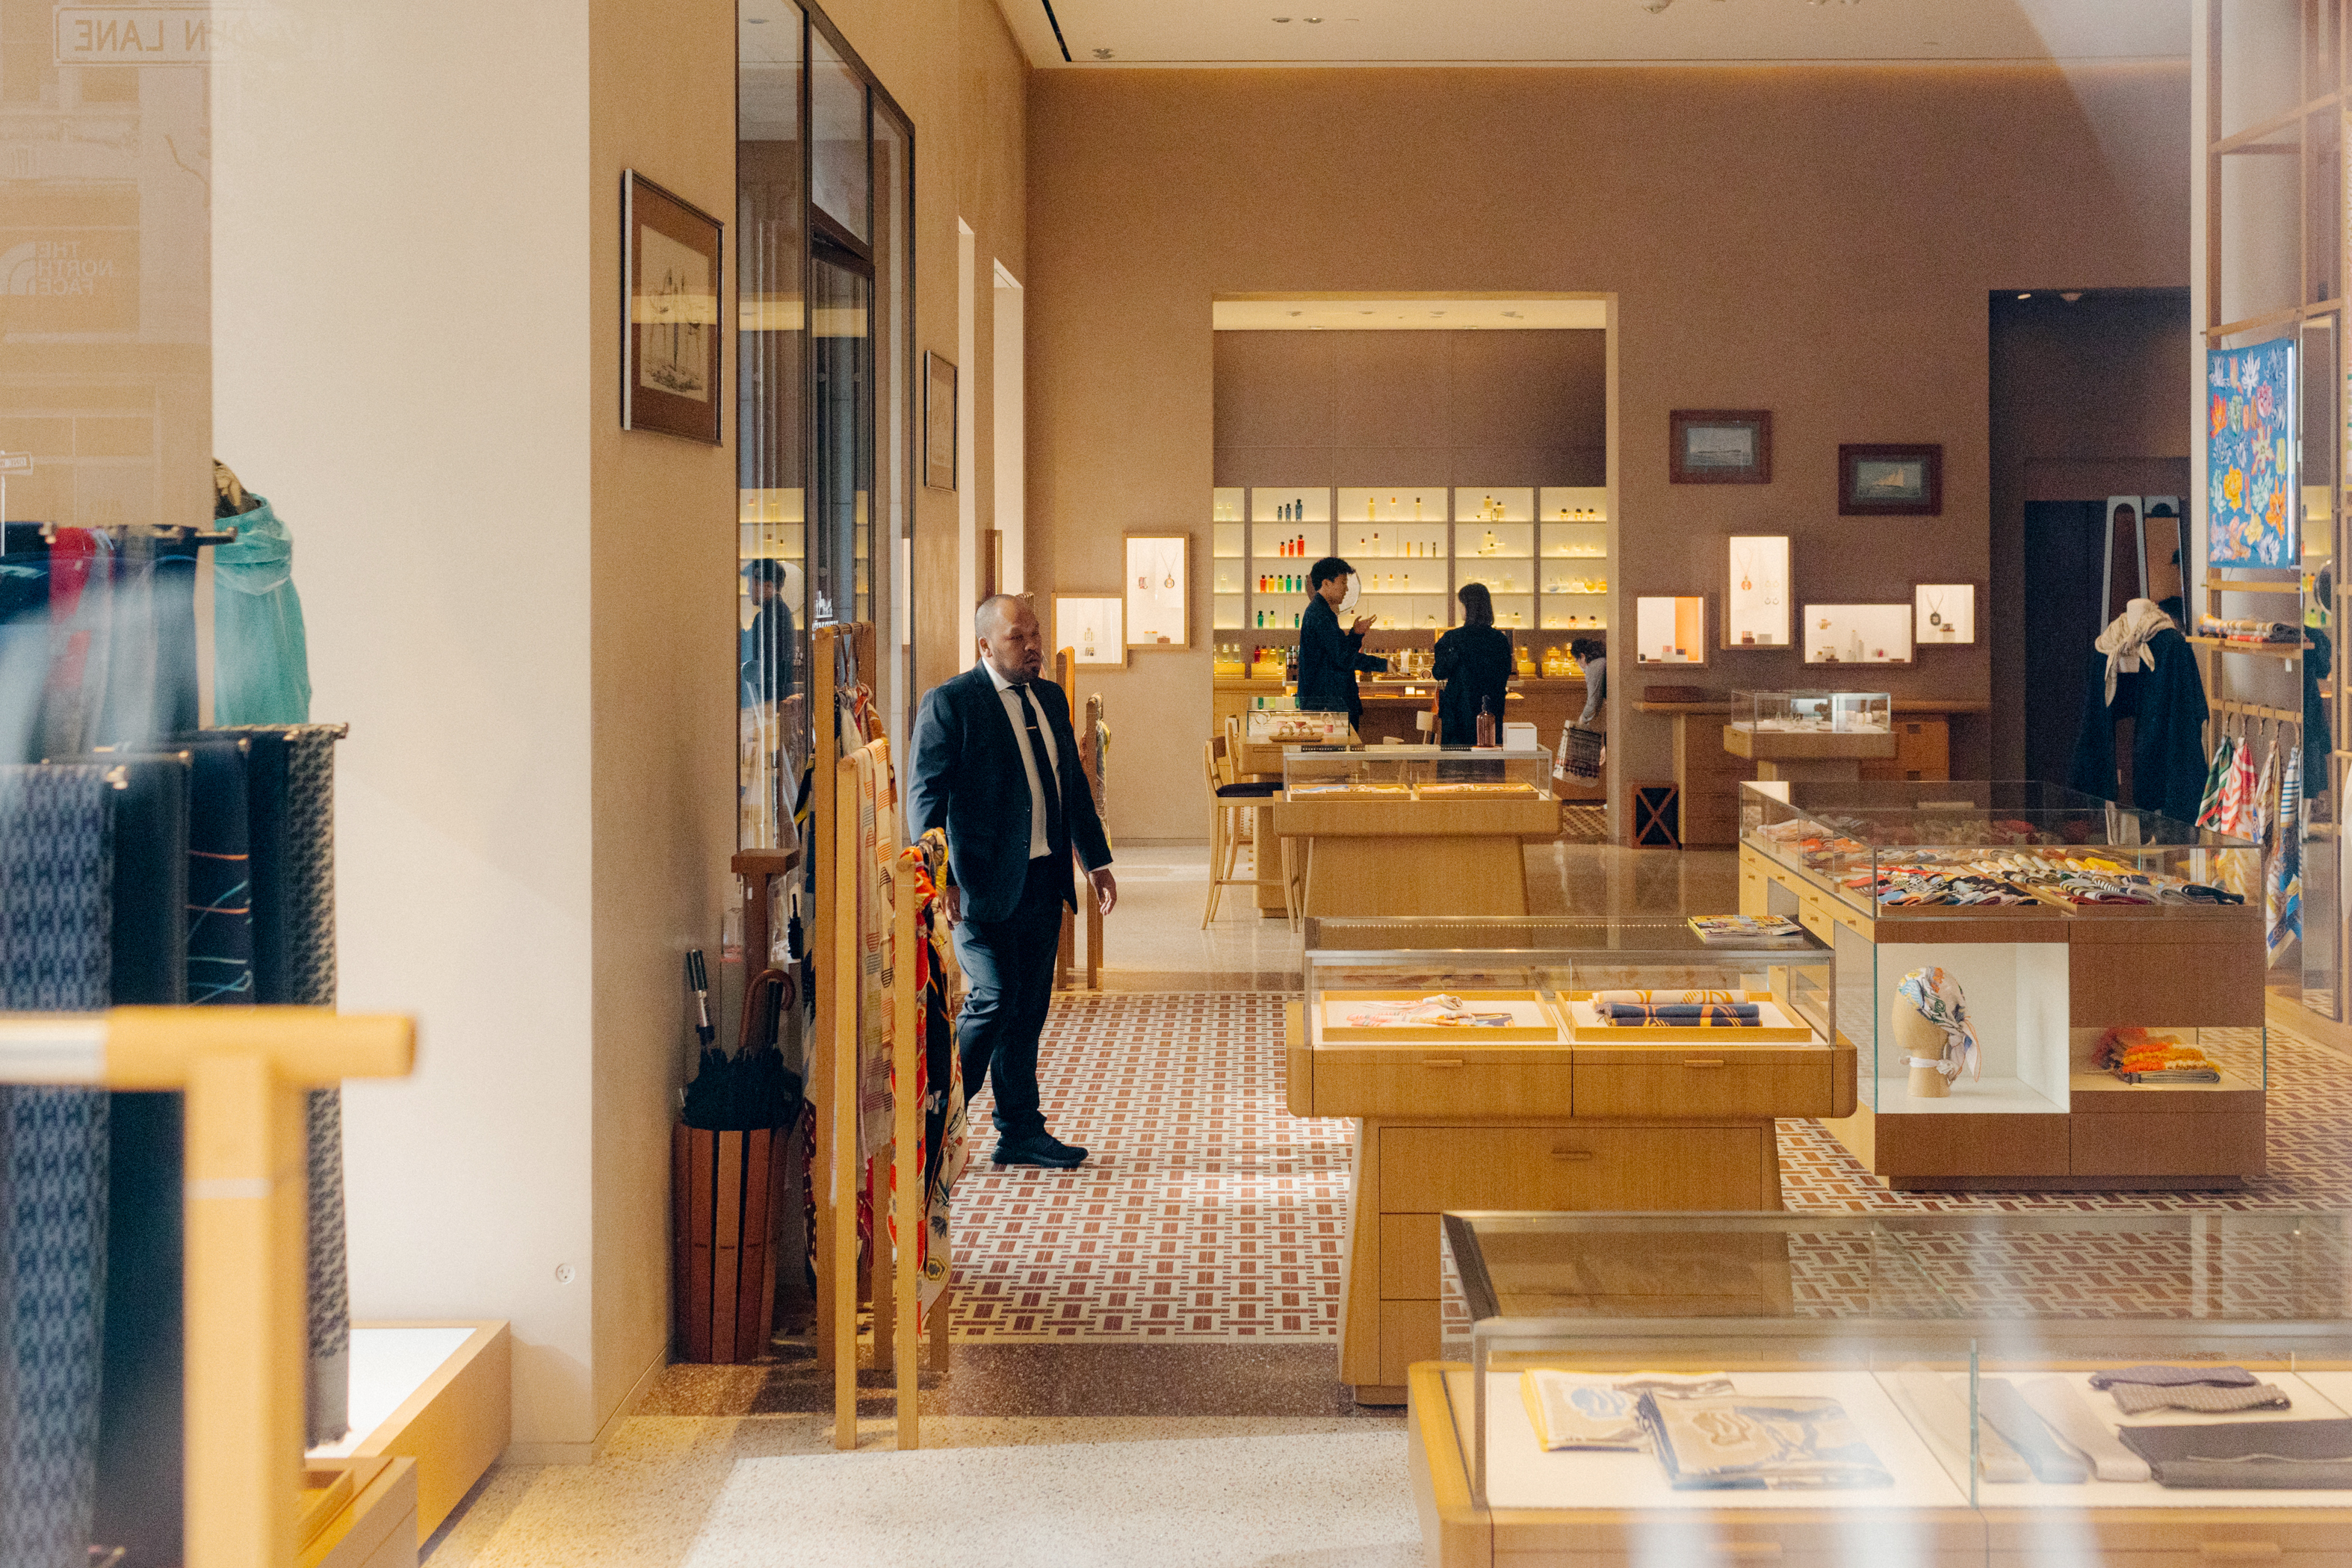 A man in a suit walks through a high-end boutique with displays of luxury goods and attentive staff.